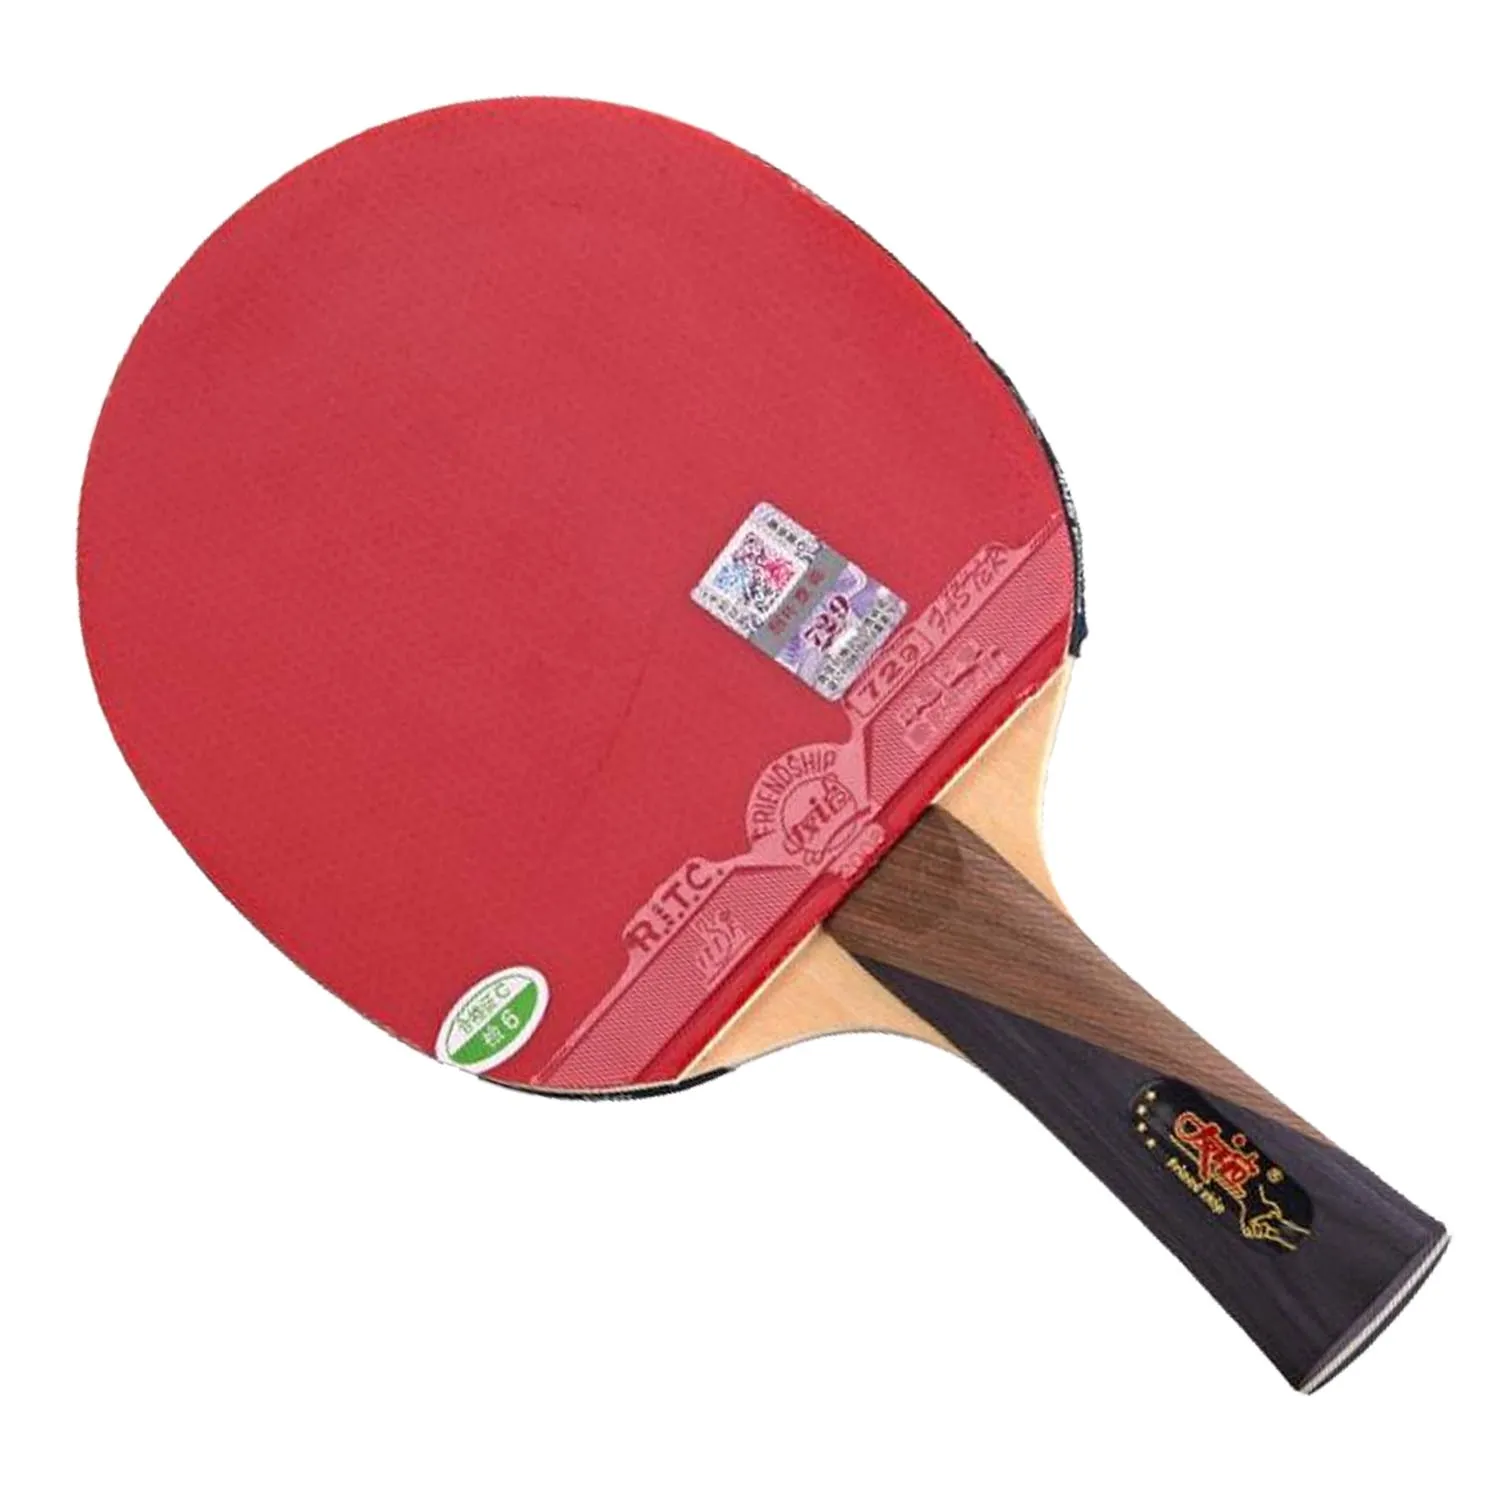 

Original 729 4 stars finished racket gold 4 stars loop with fast attack table tennis racket ping pong gift one case